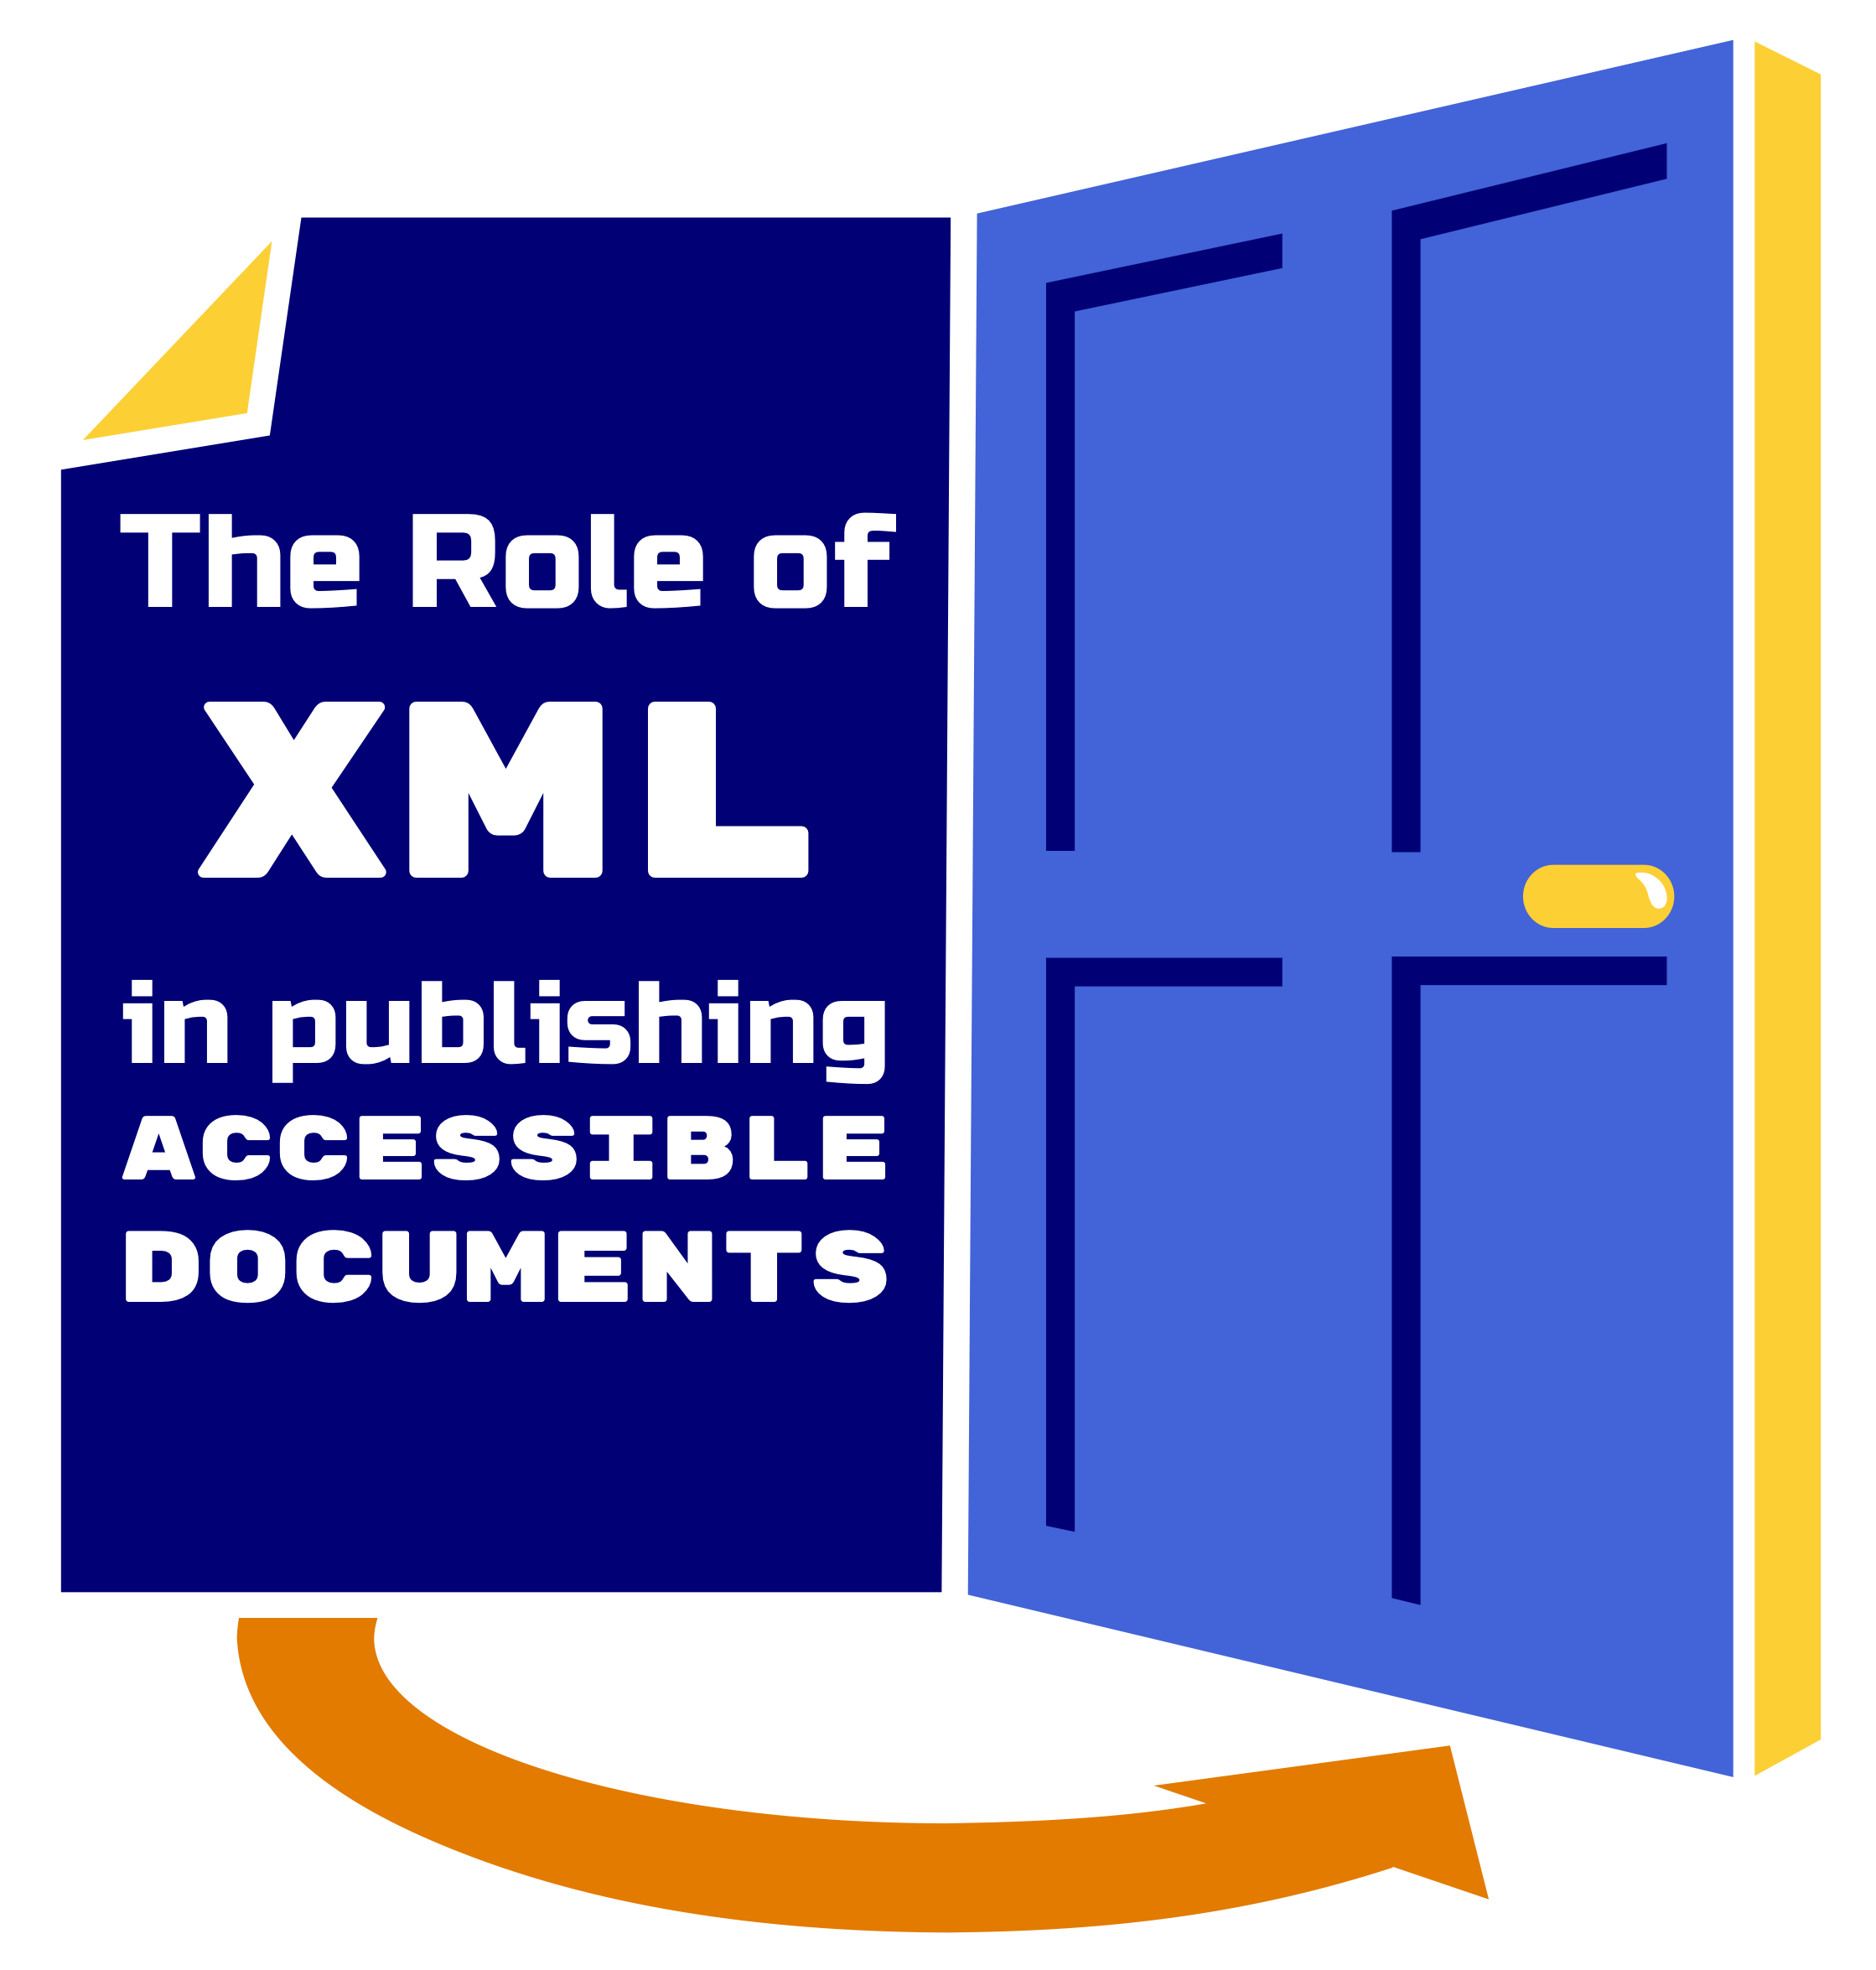 The Role of XML in Publishing Accessible Documents